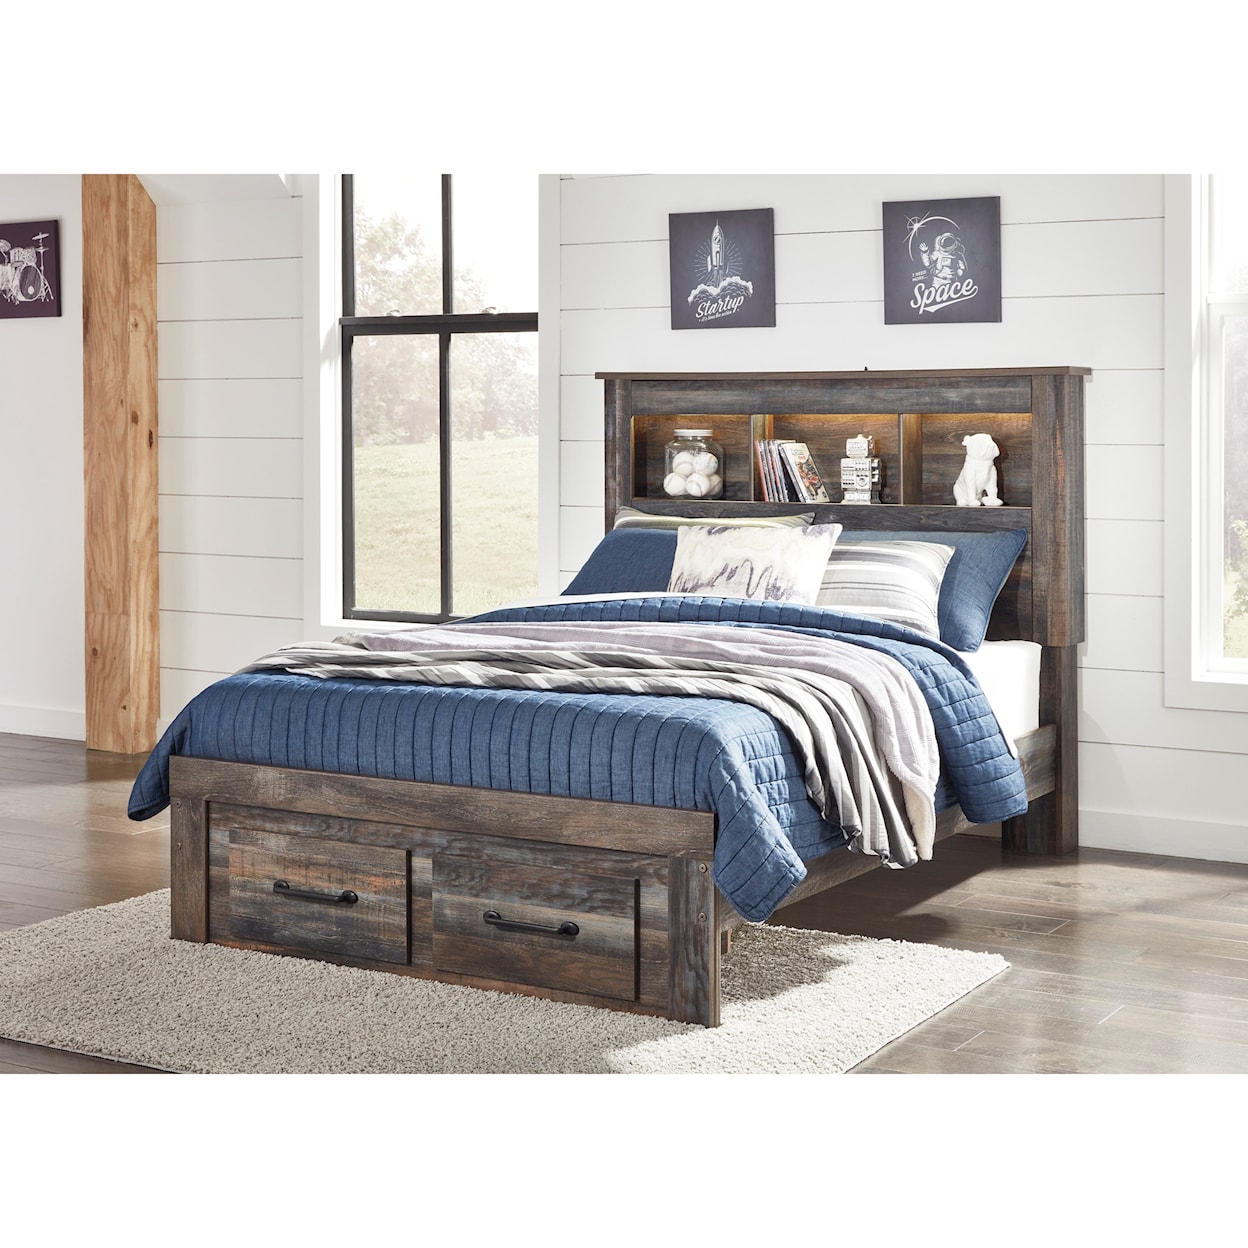 Signature Design by Ashley Furniture Drystan Full Bookcase Bed with Footboard Drawers